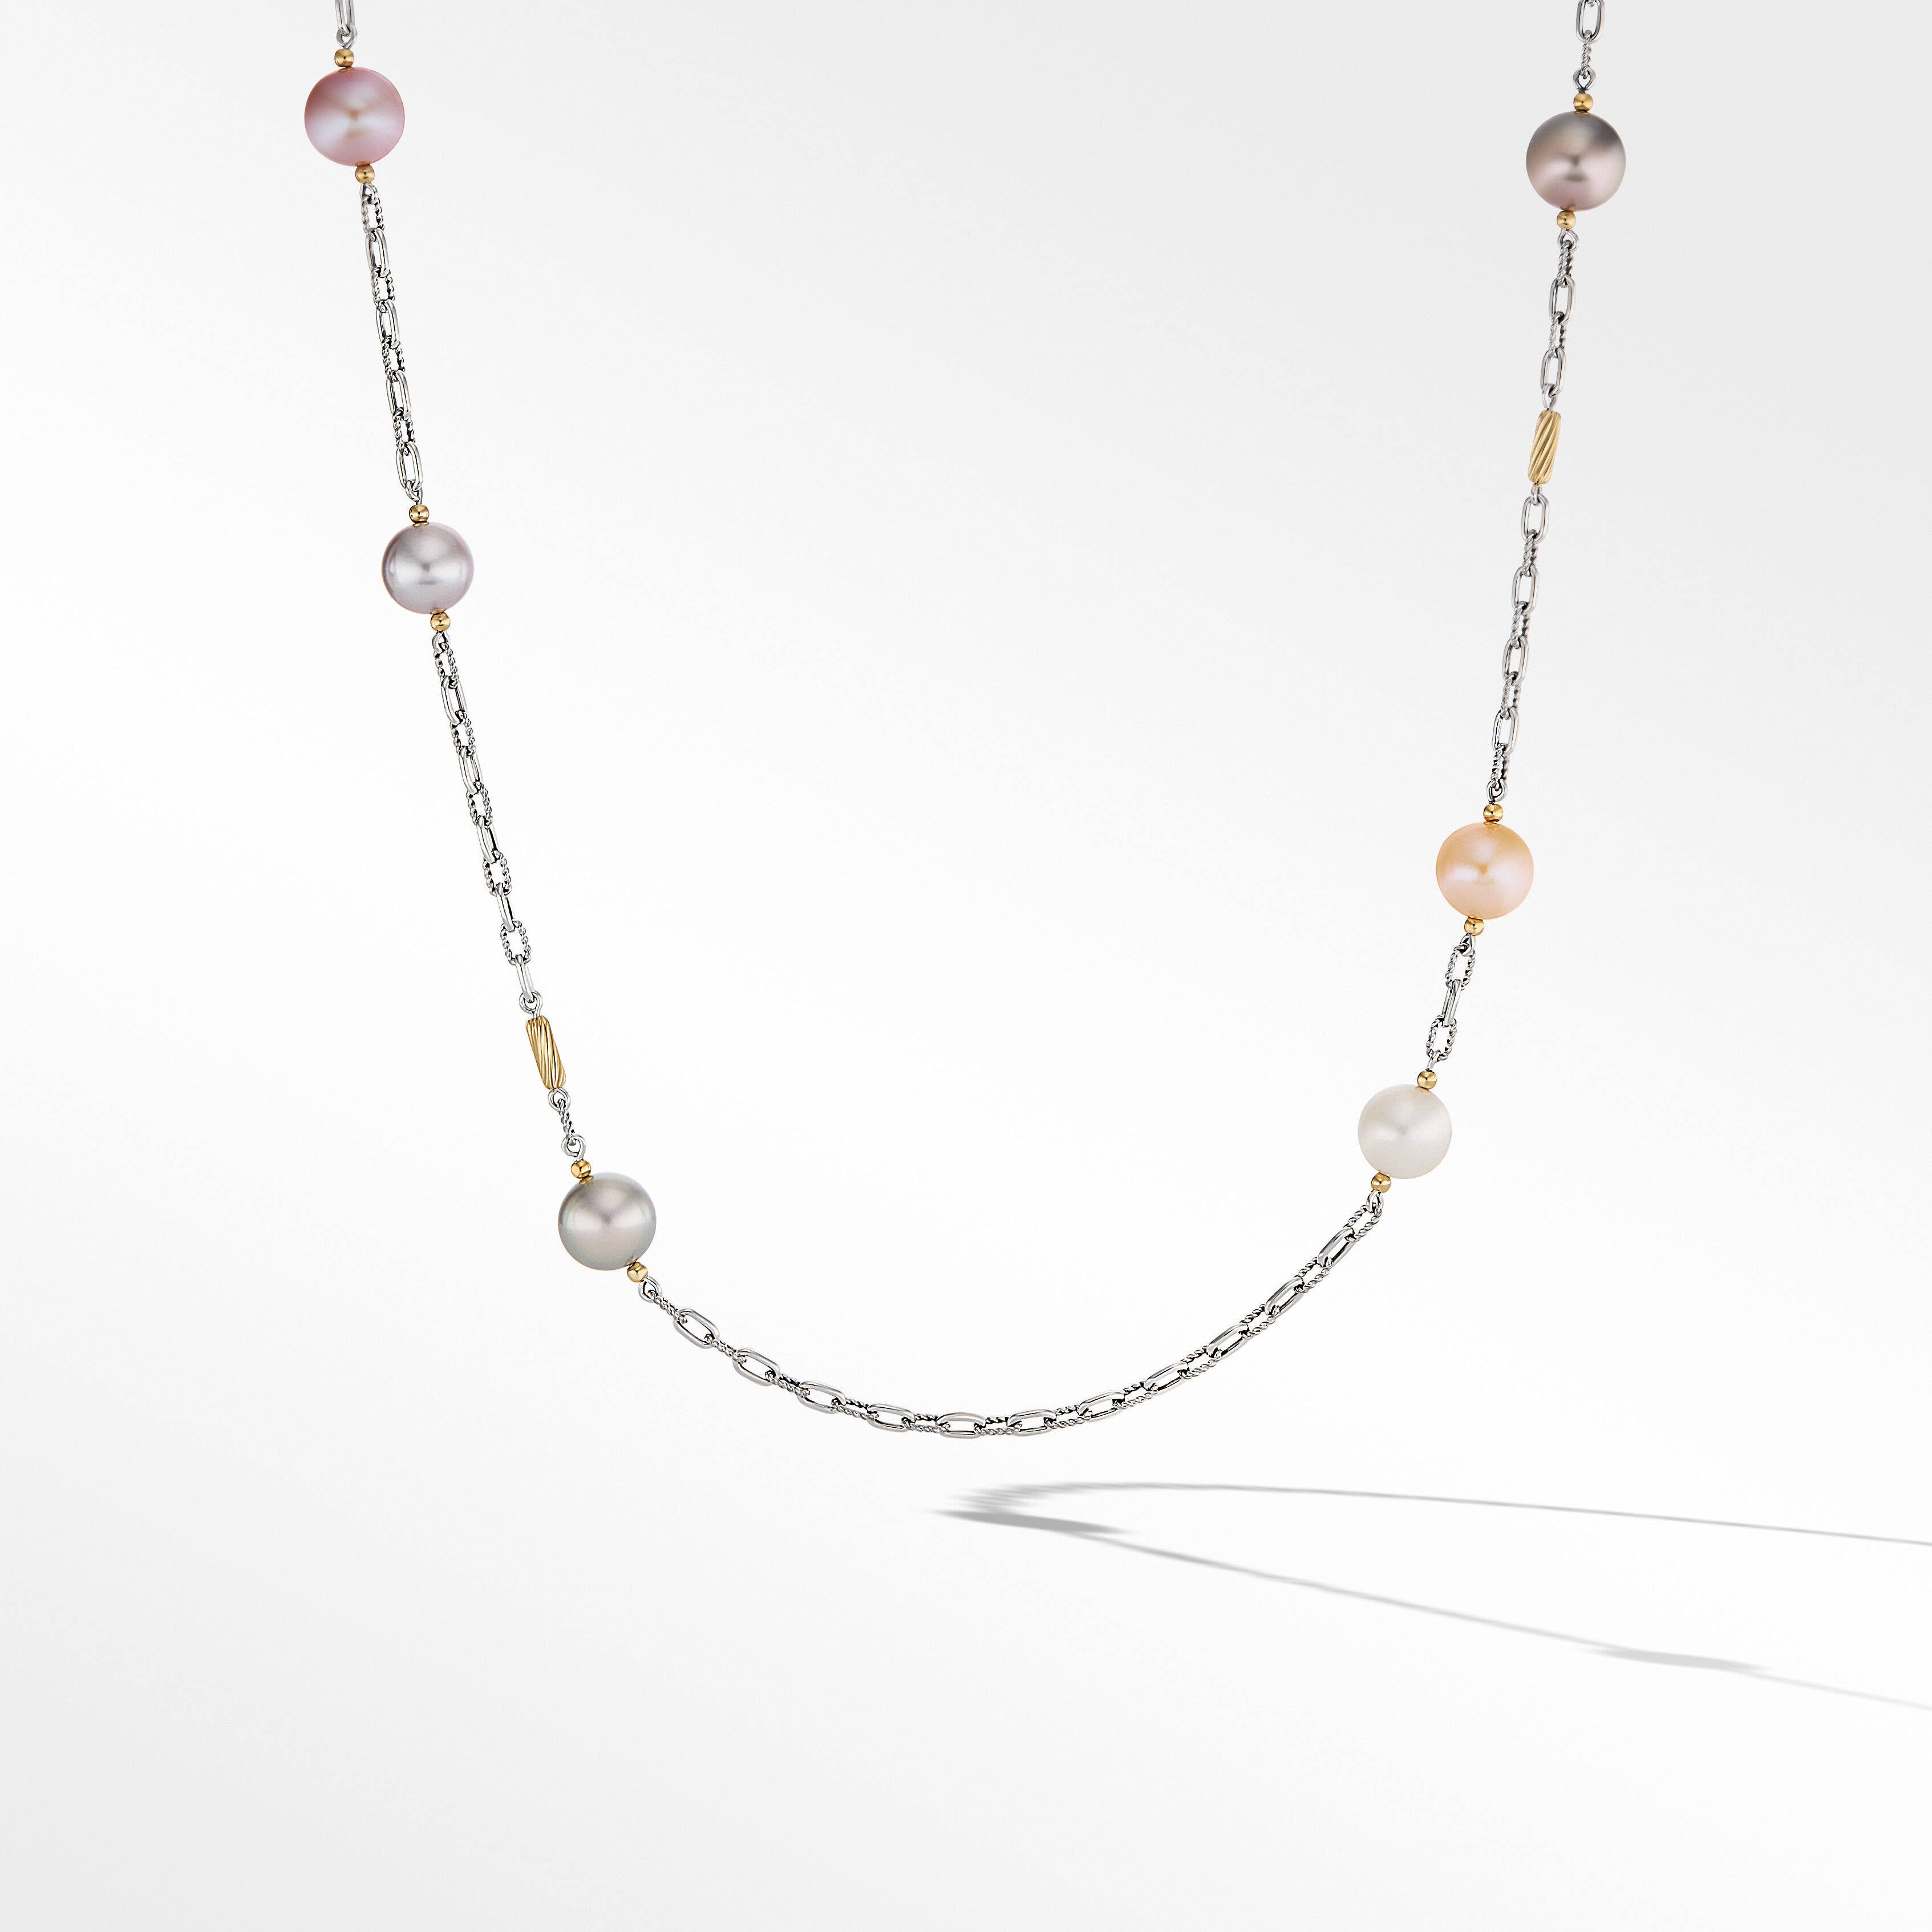 DY Madison® Color Pearl Necklace in Sterling Silver with 18K Yellow Gold